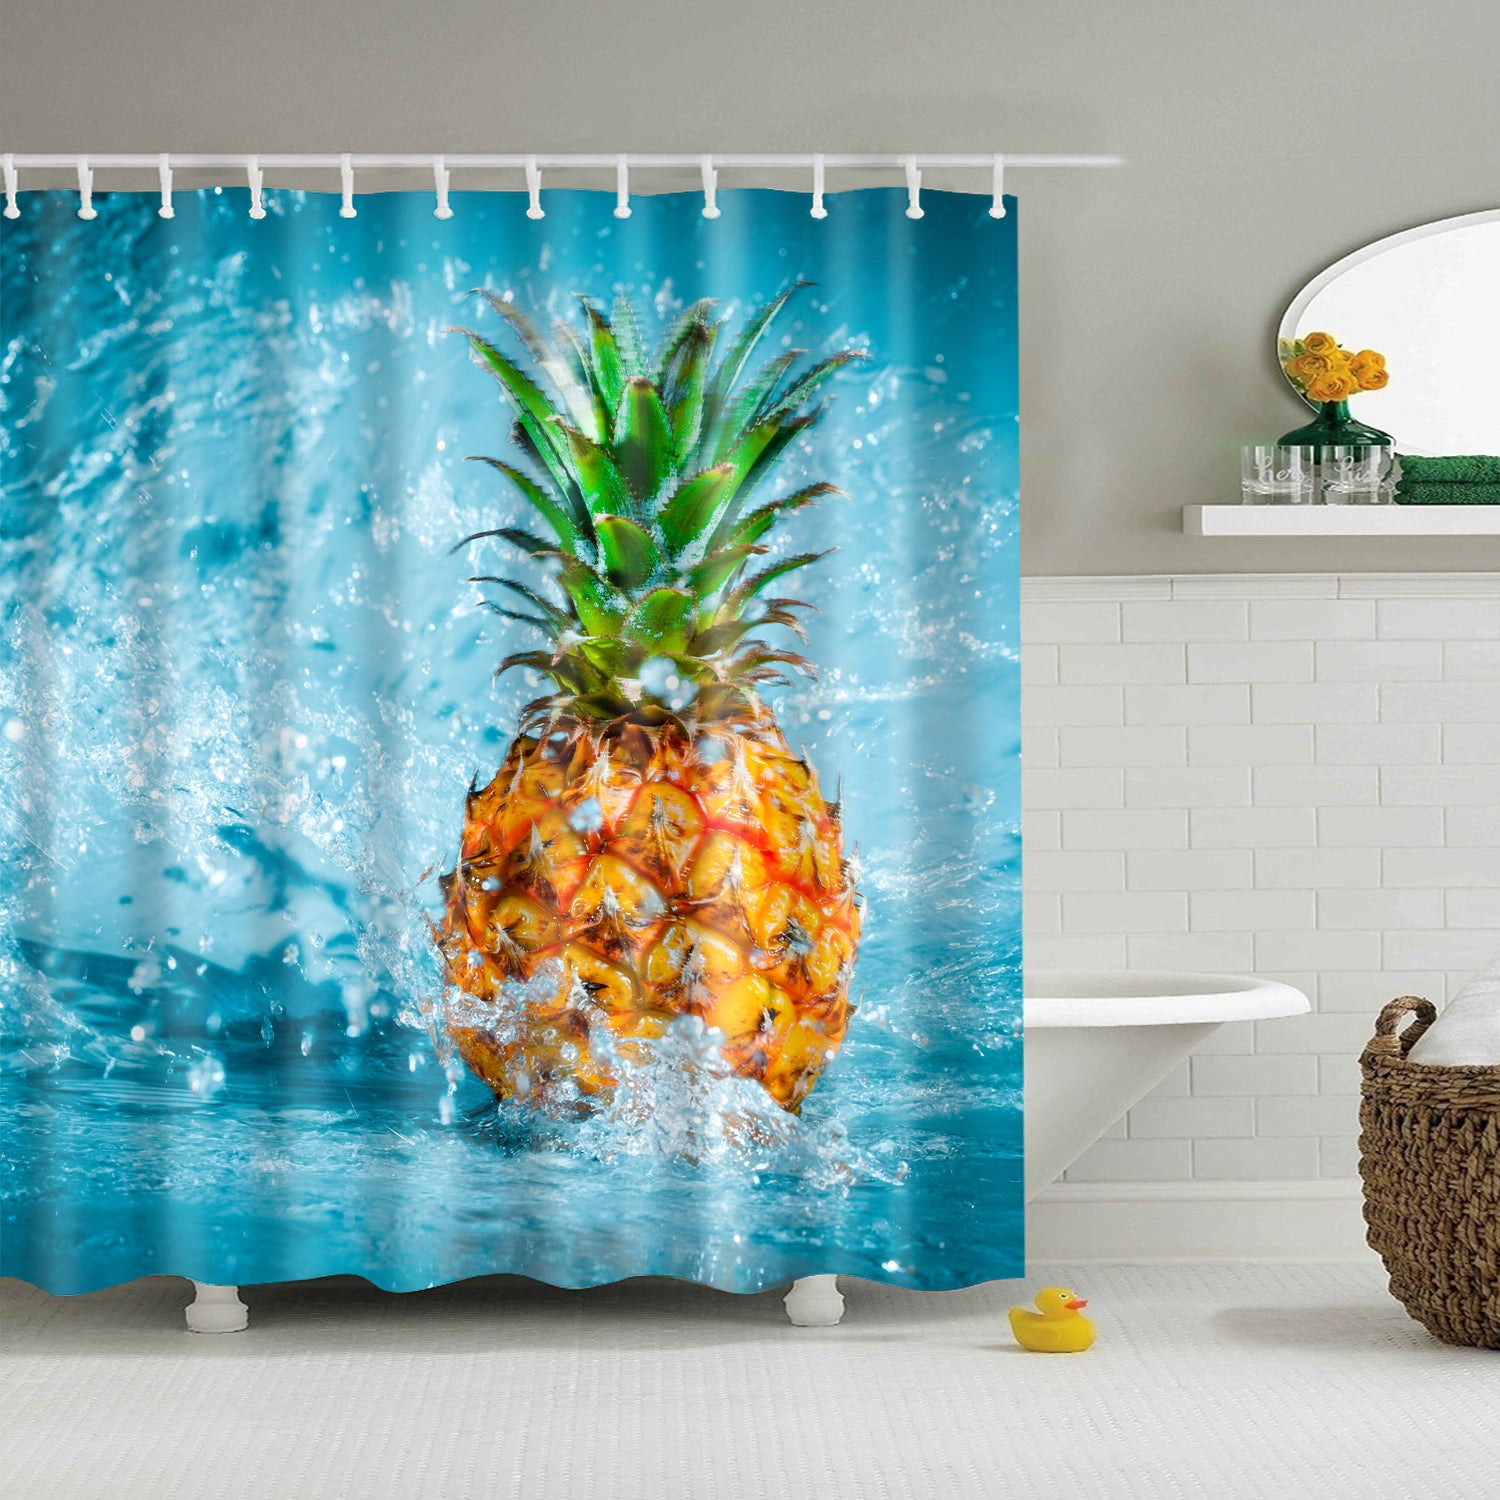 pineapple shower curtain black and white